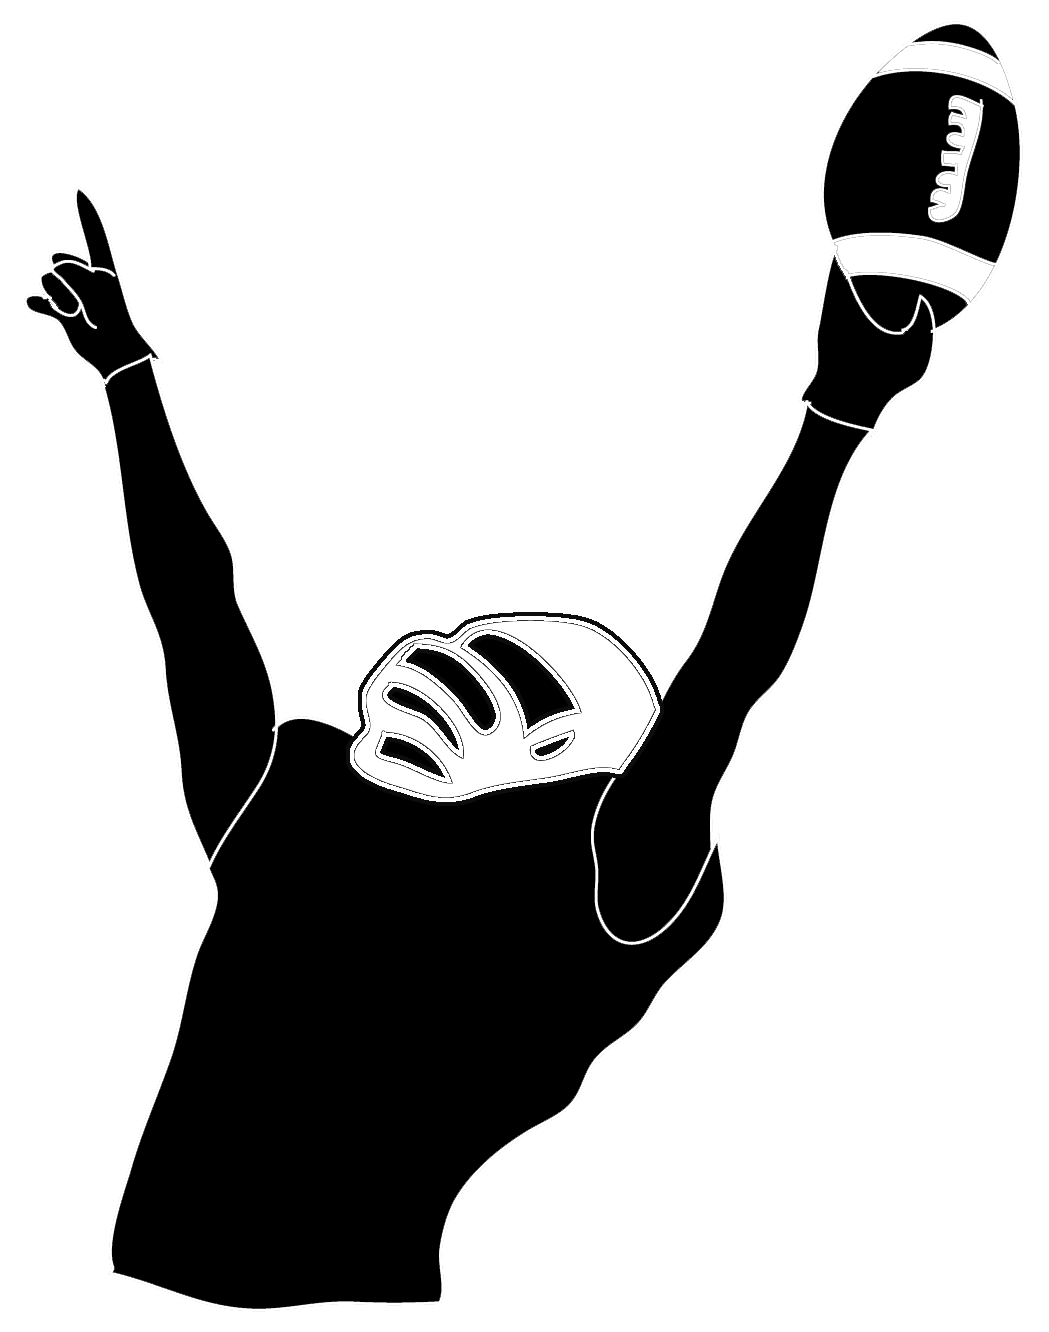 Football Player 2 Football Player Black Image Clipart